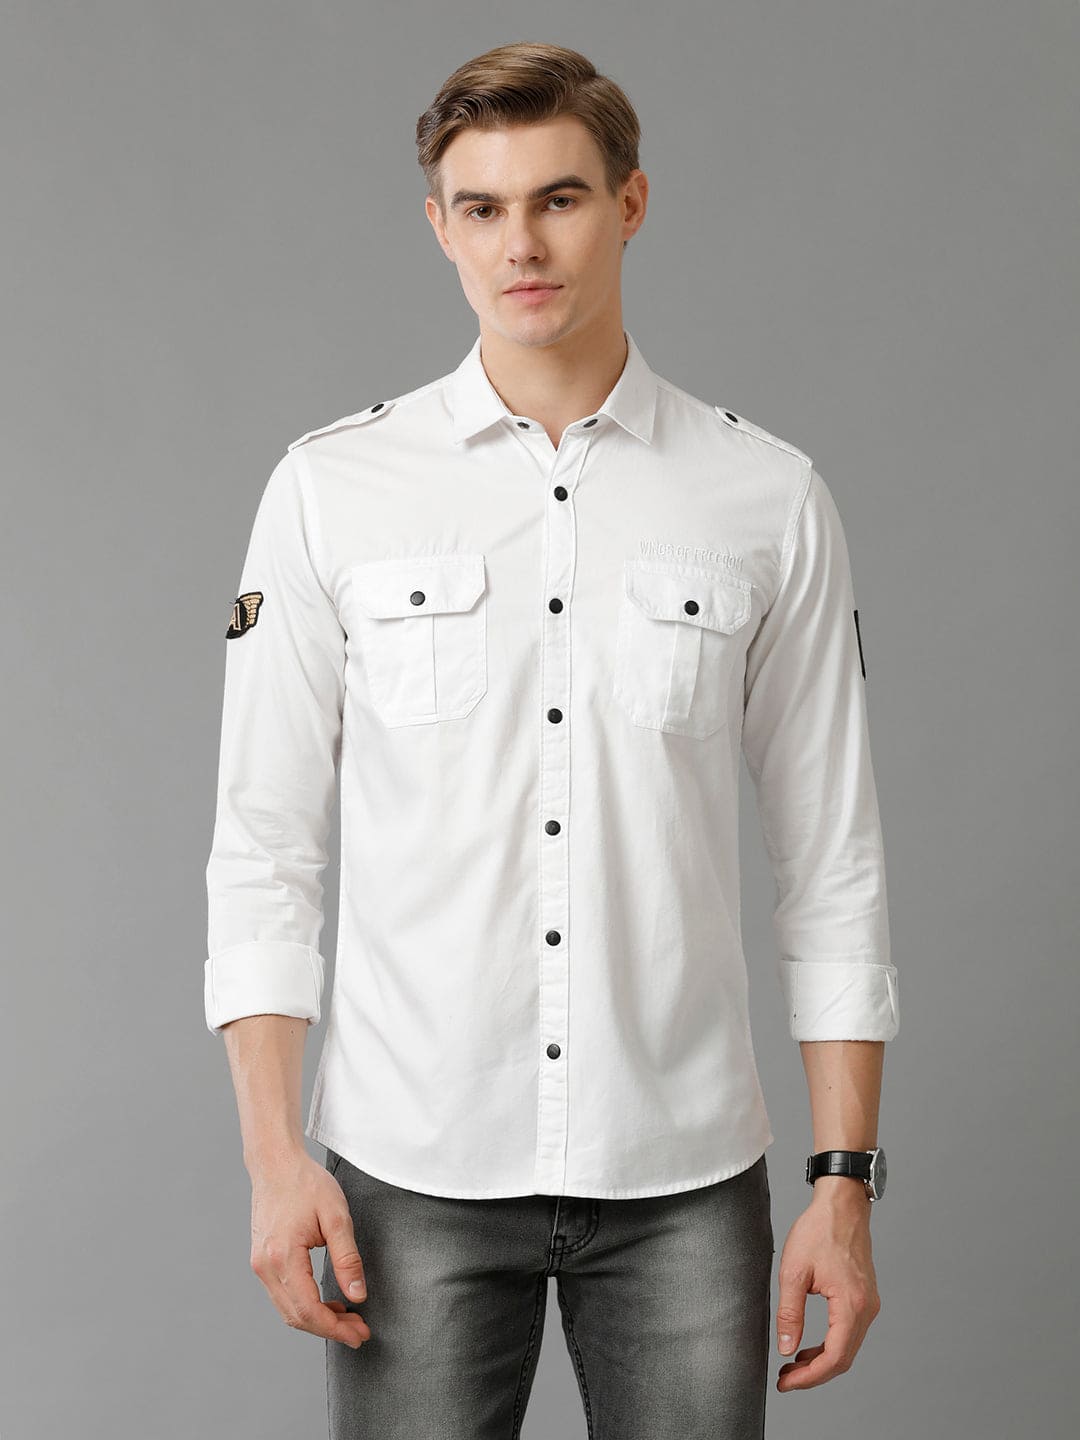 Latest Styles and Trends of Men's Shirts at Adro